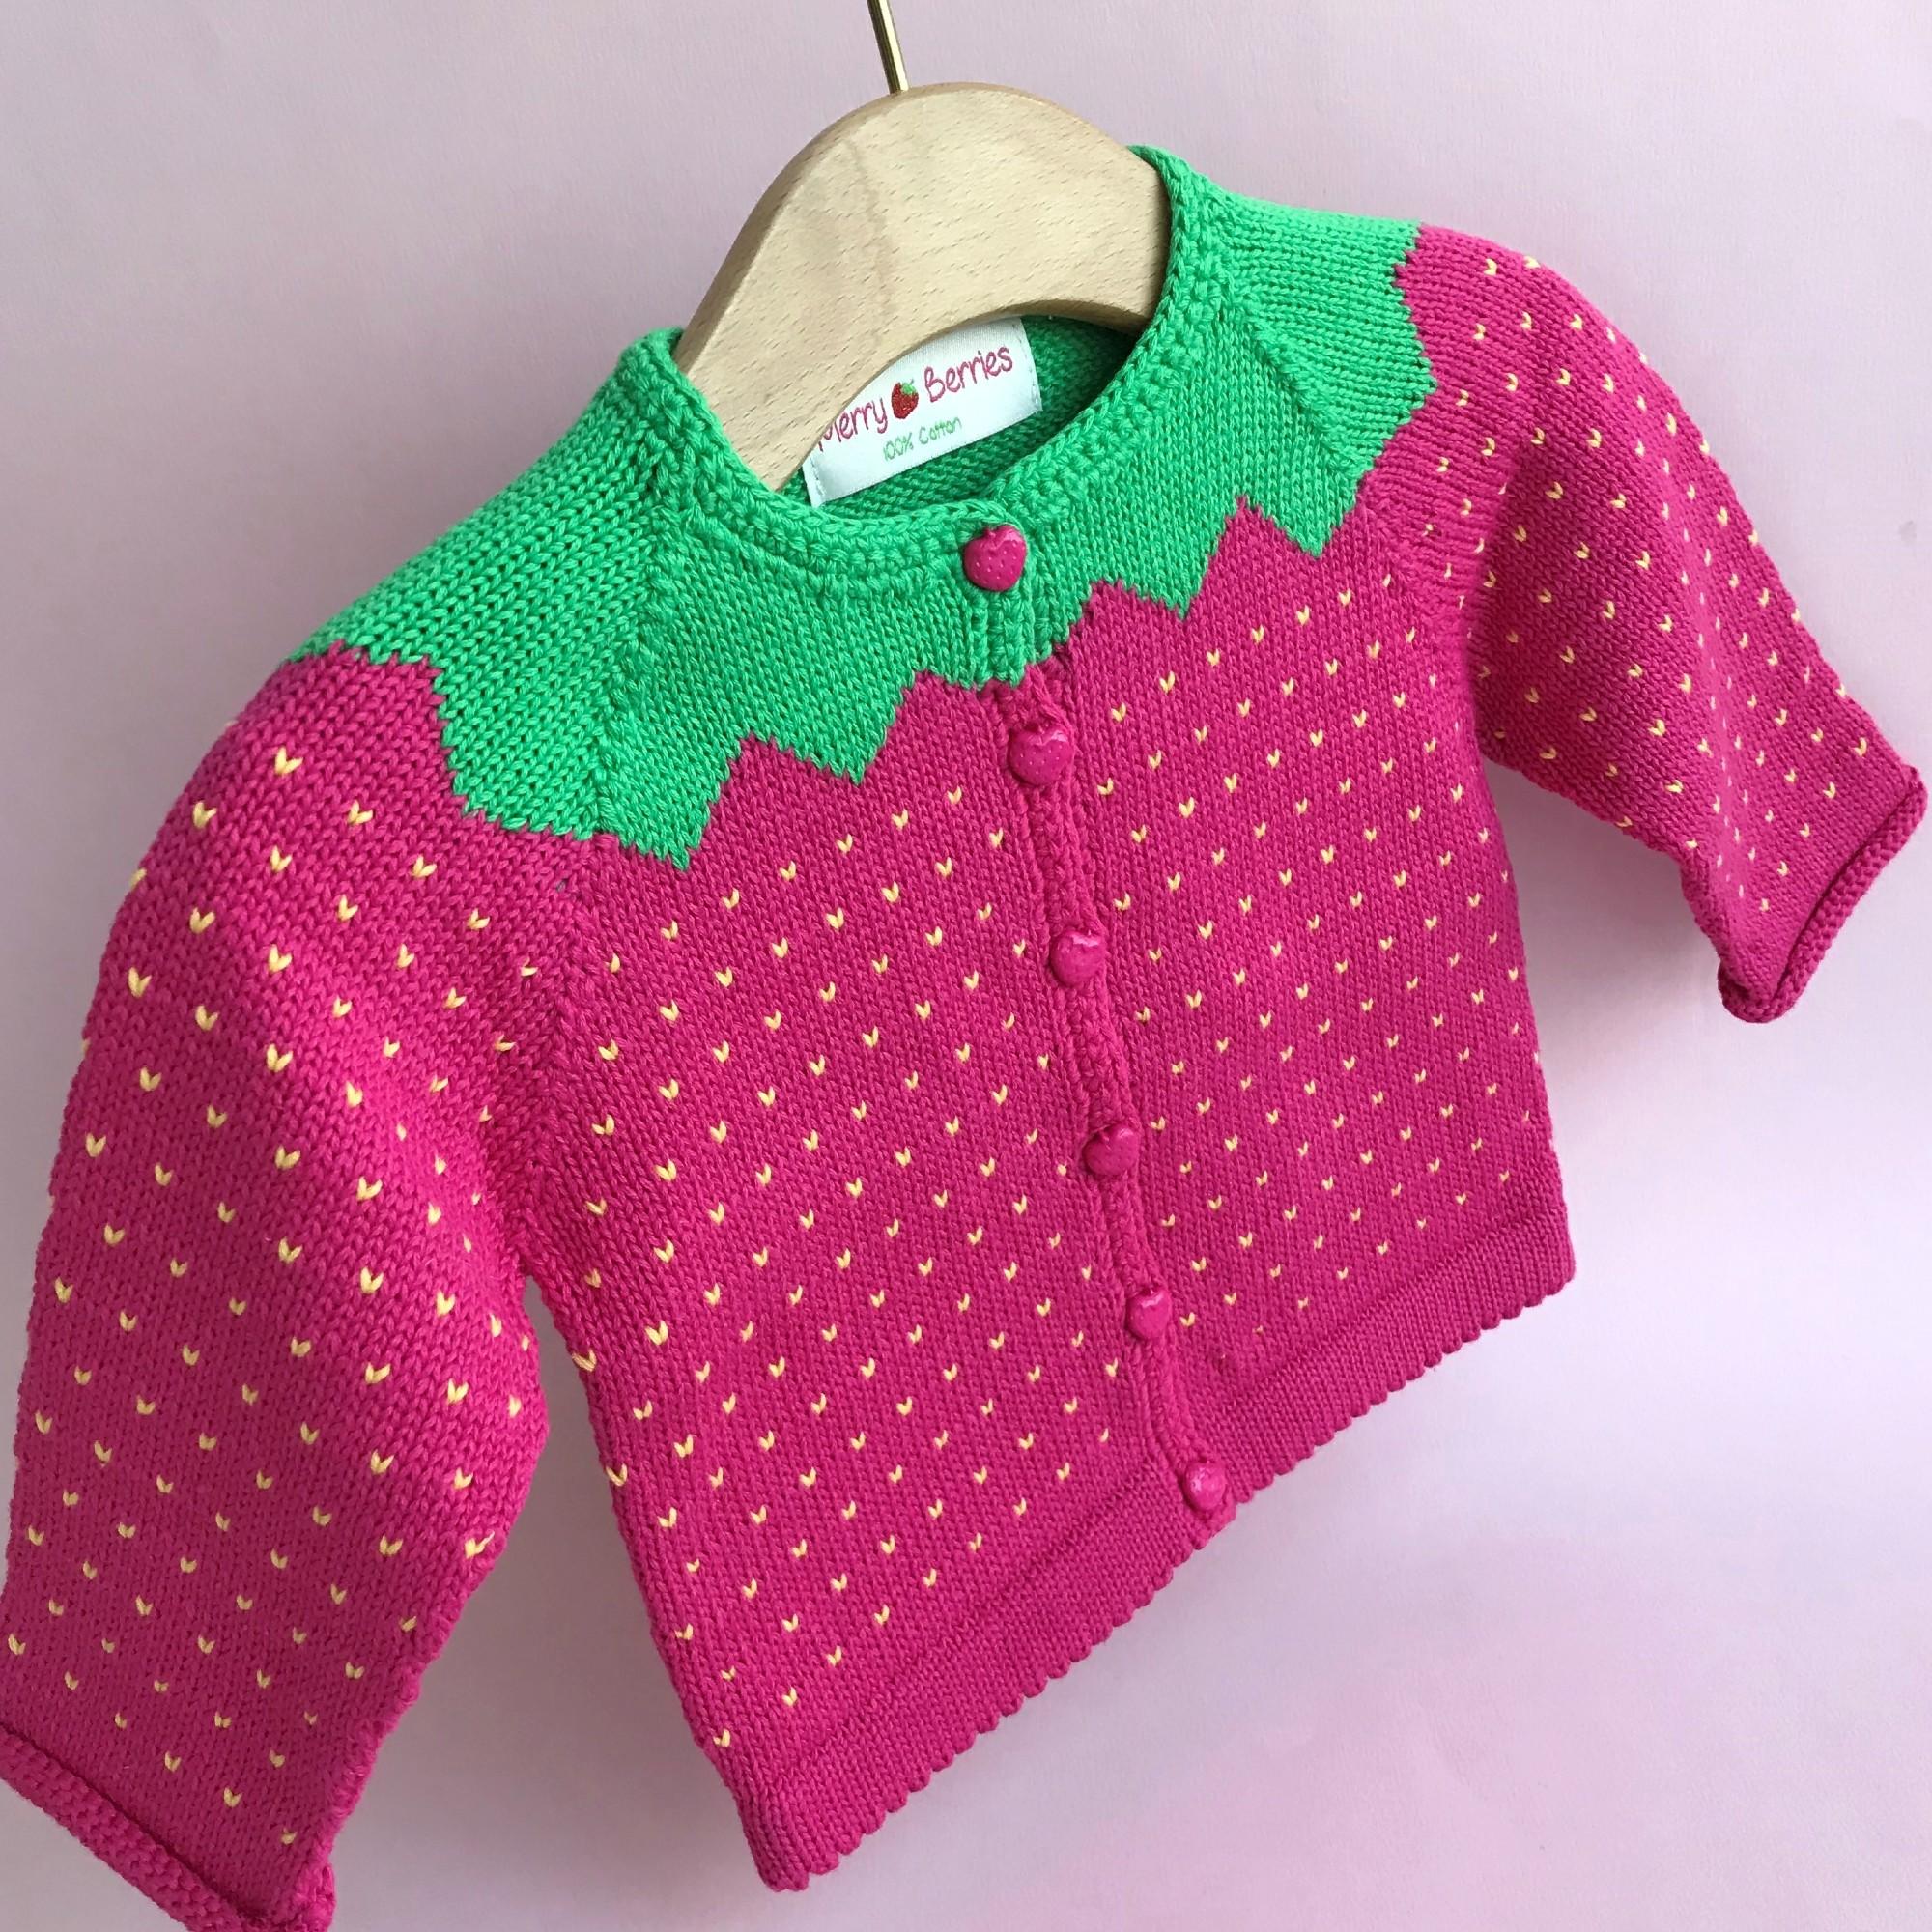 Merry Berries - Raspberry Knitted baby Cardigan-Cotton